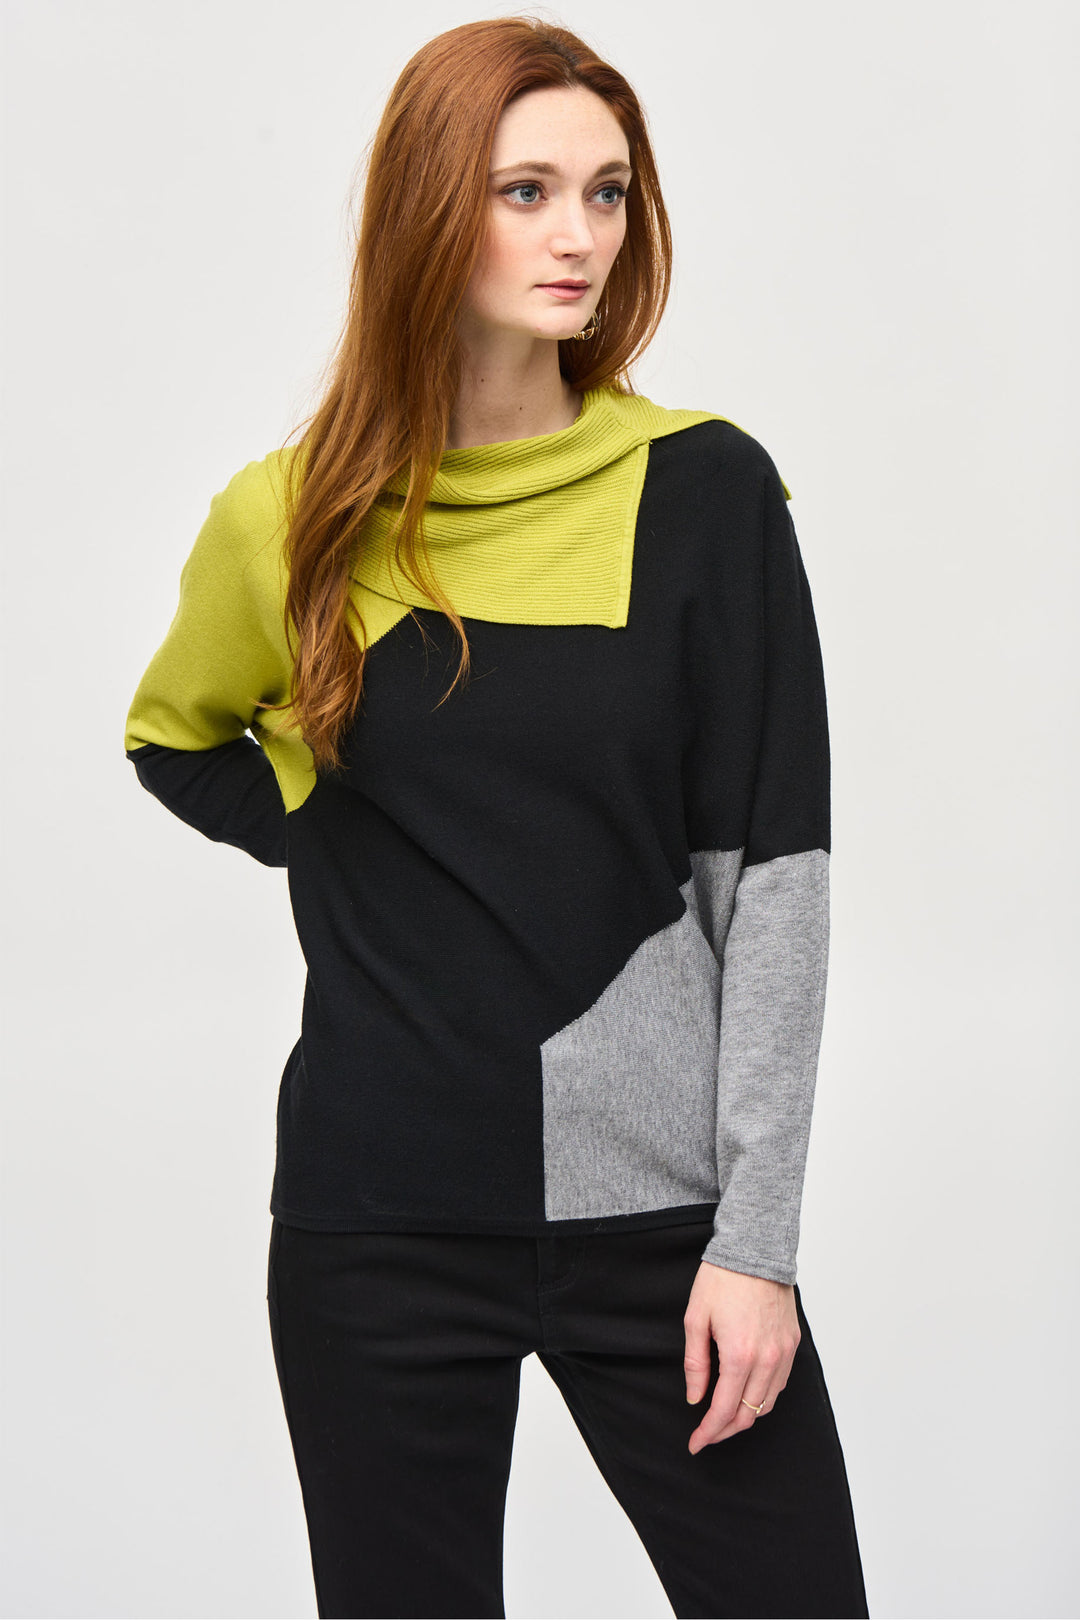 Joseph Ribkoff Fall 2024 The Colourblock Split Cowl Top from Joseph Ribkoff is a must-have for the cooler seasons. It’s made in Canada with cozy knit fabric, and features a cowl neck and long straight sleeves for extra warmth.